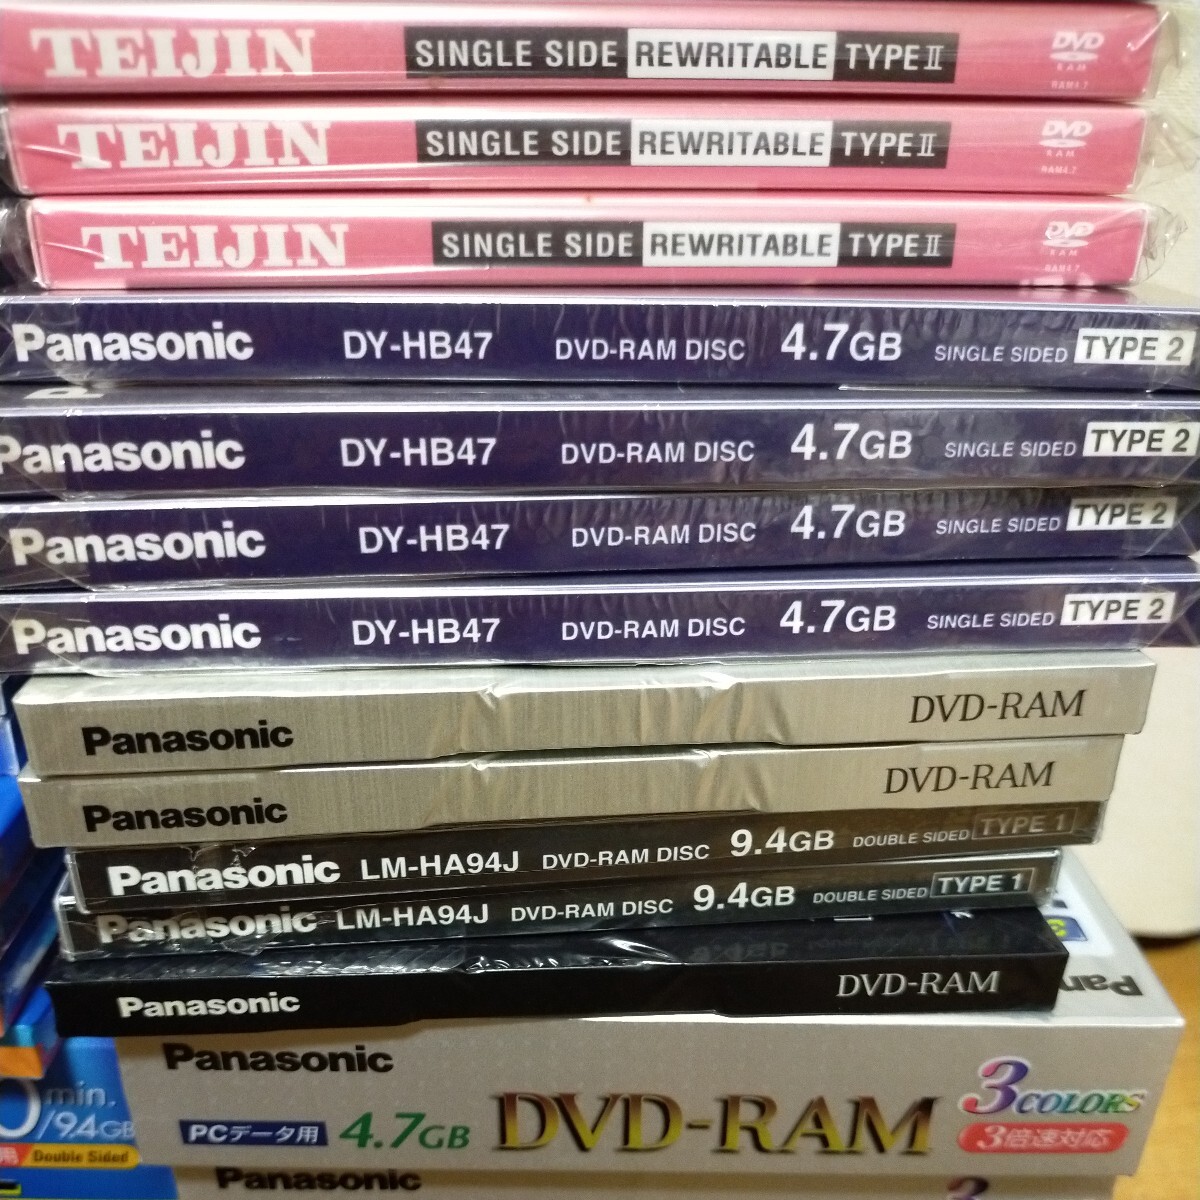 DVD-RAM large amount set summarize Panasonic maxell TEIJIN TDK Victor Leader media Techno FINE 120 size including in a package un- possible Panasonic mak cell 